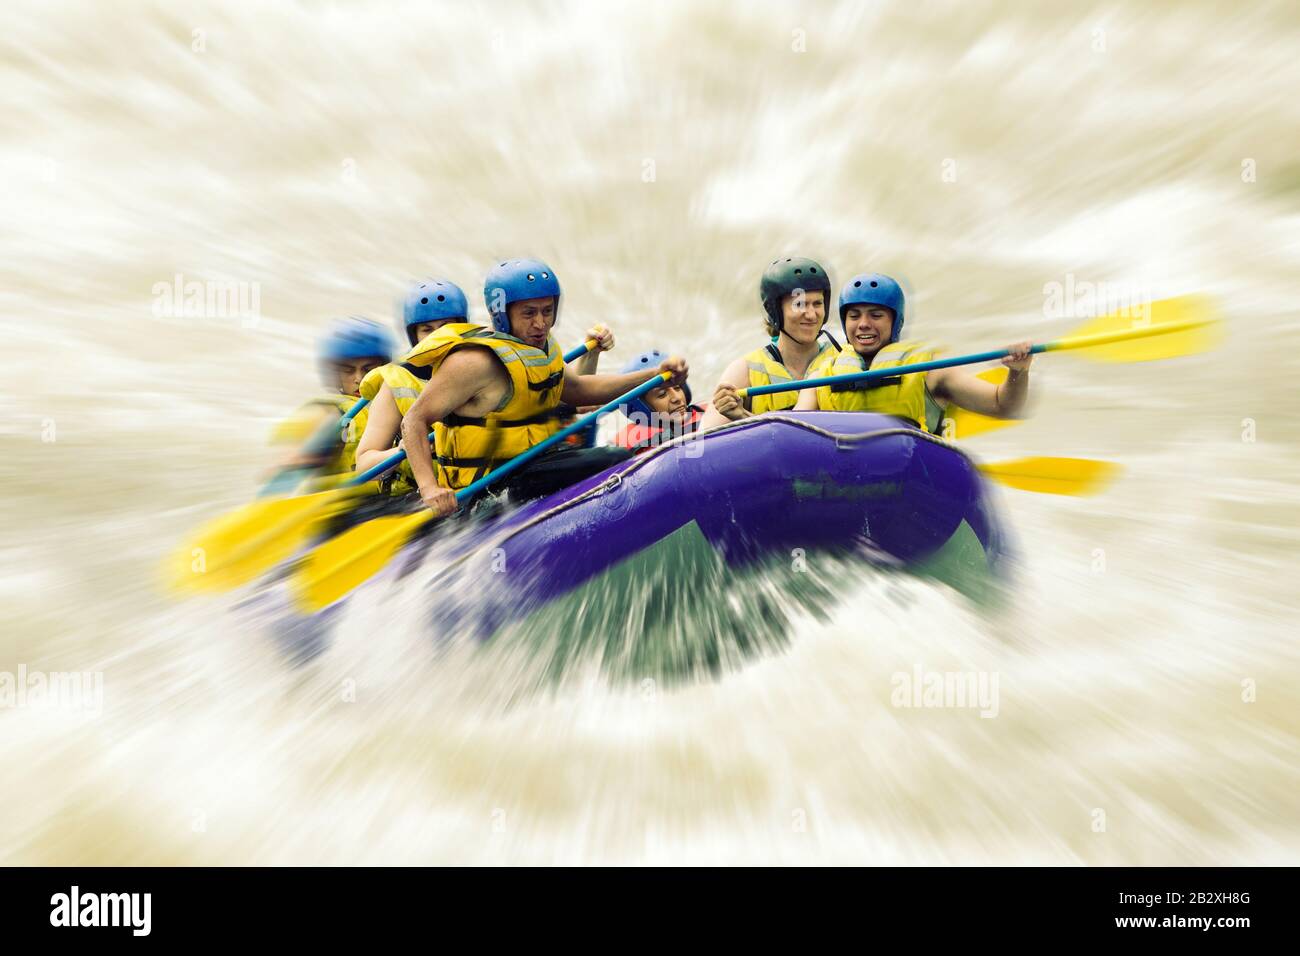 Whitewater Rafting Blurred In Post Fabrication Stock Photo